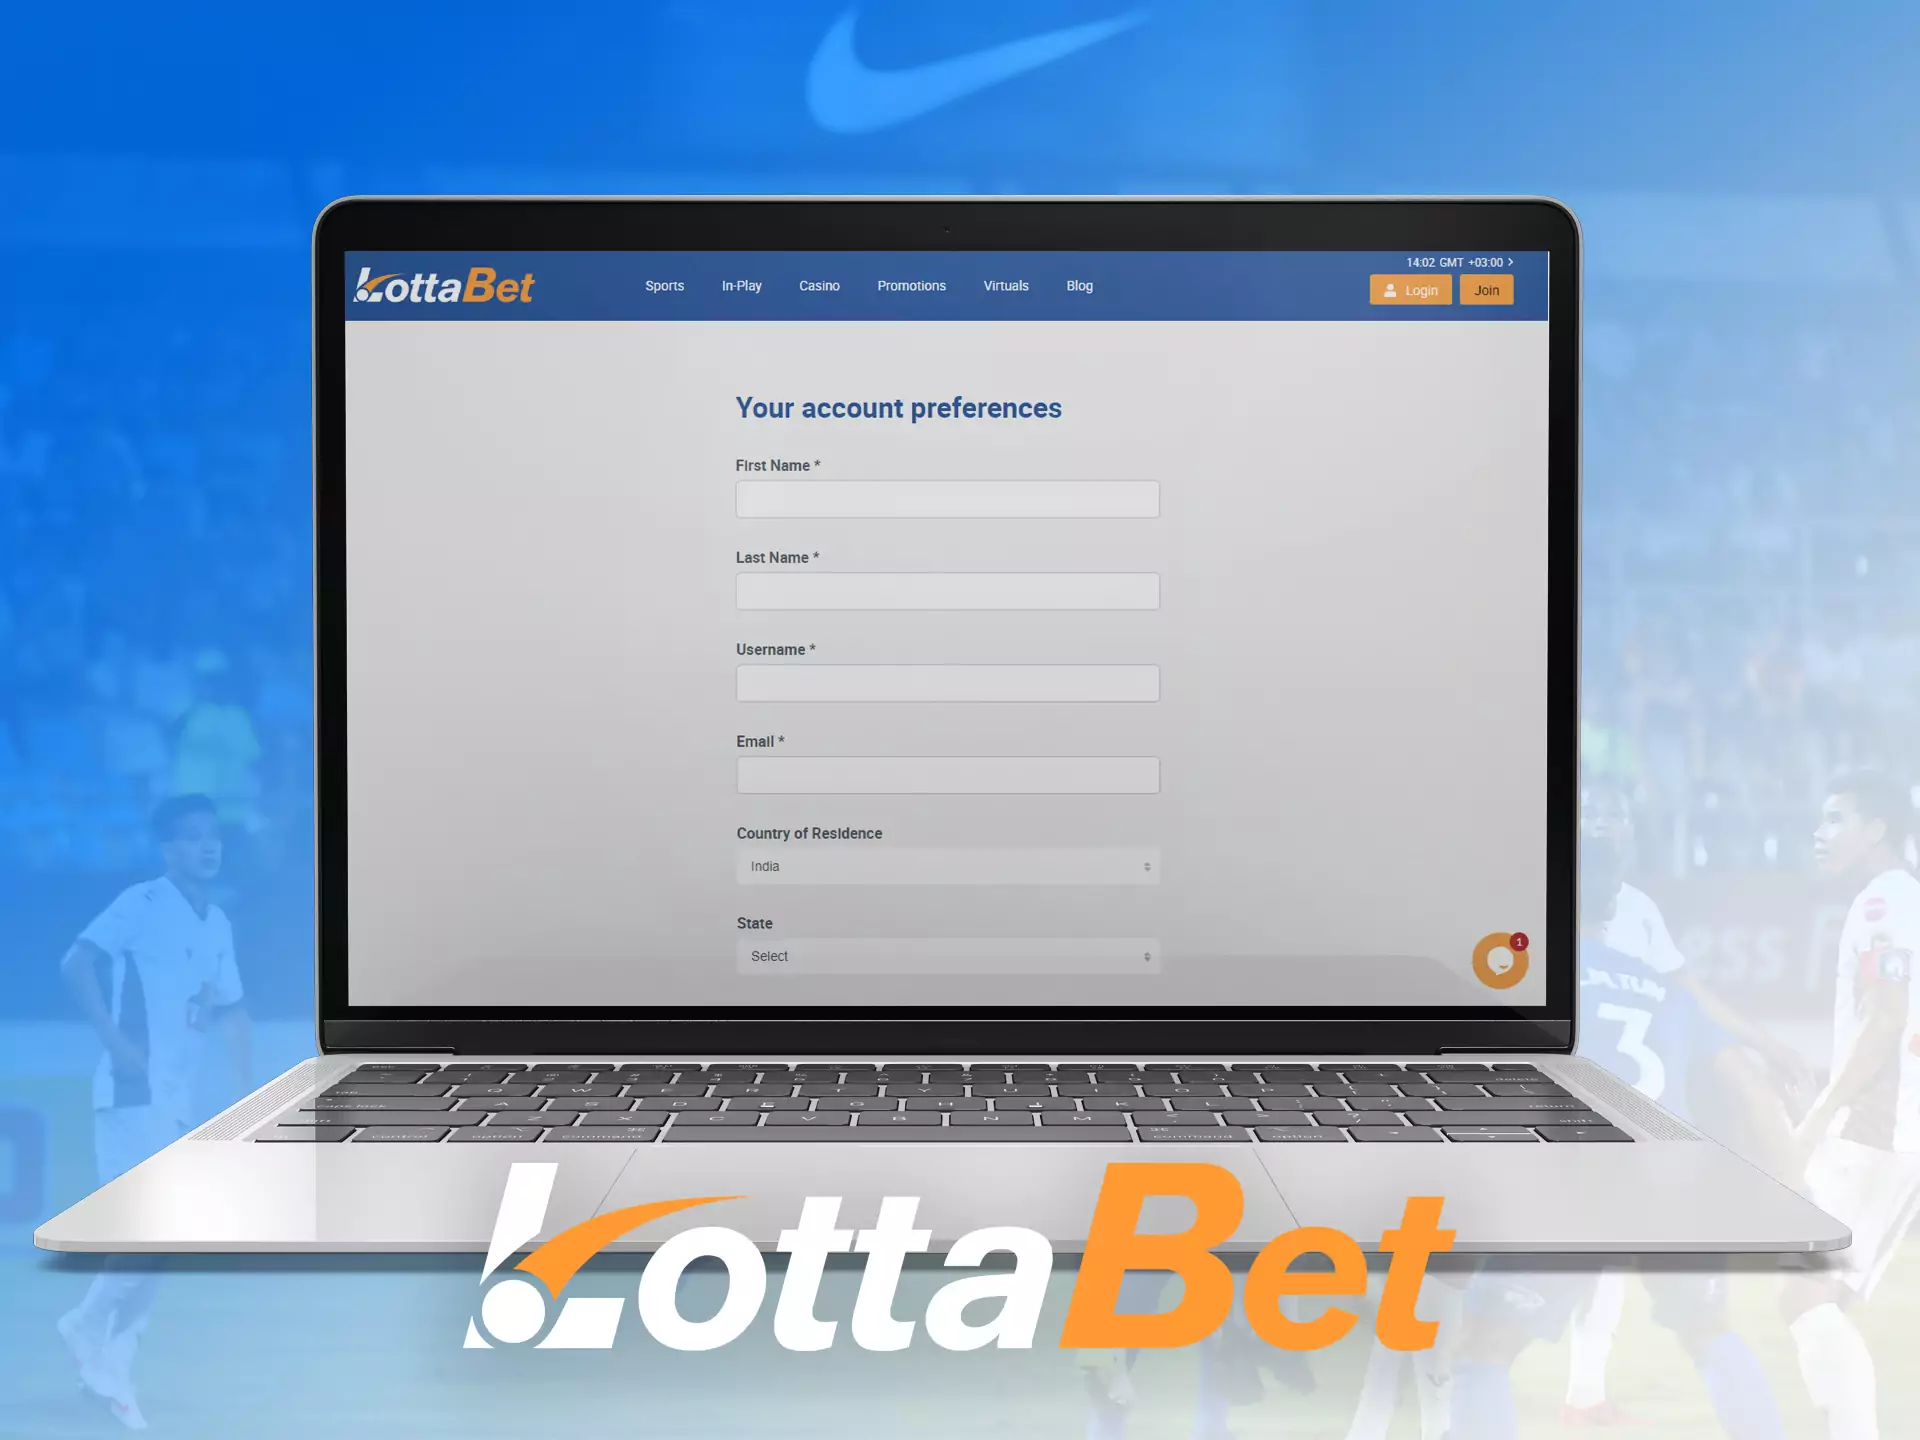 To start enjoying all the features of Lottabet, create an account.